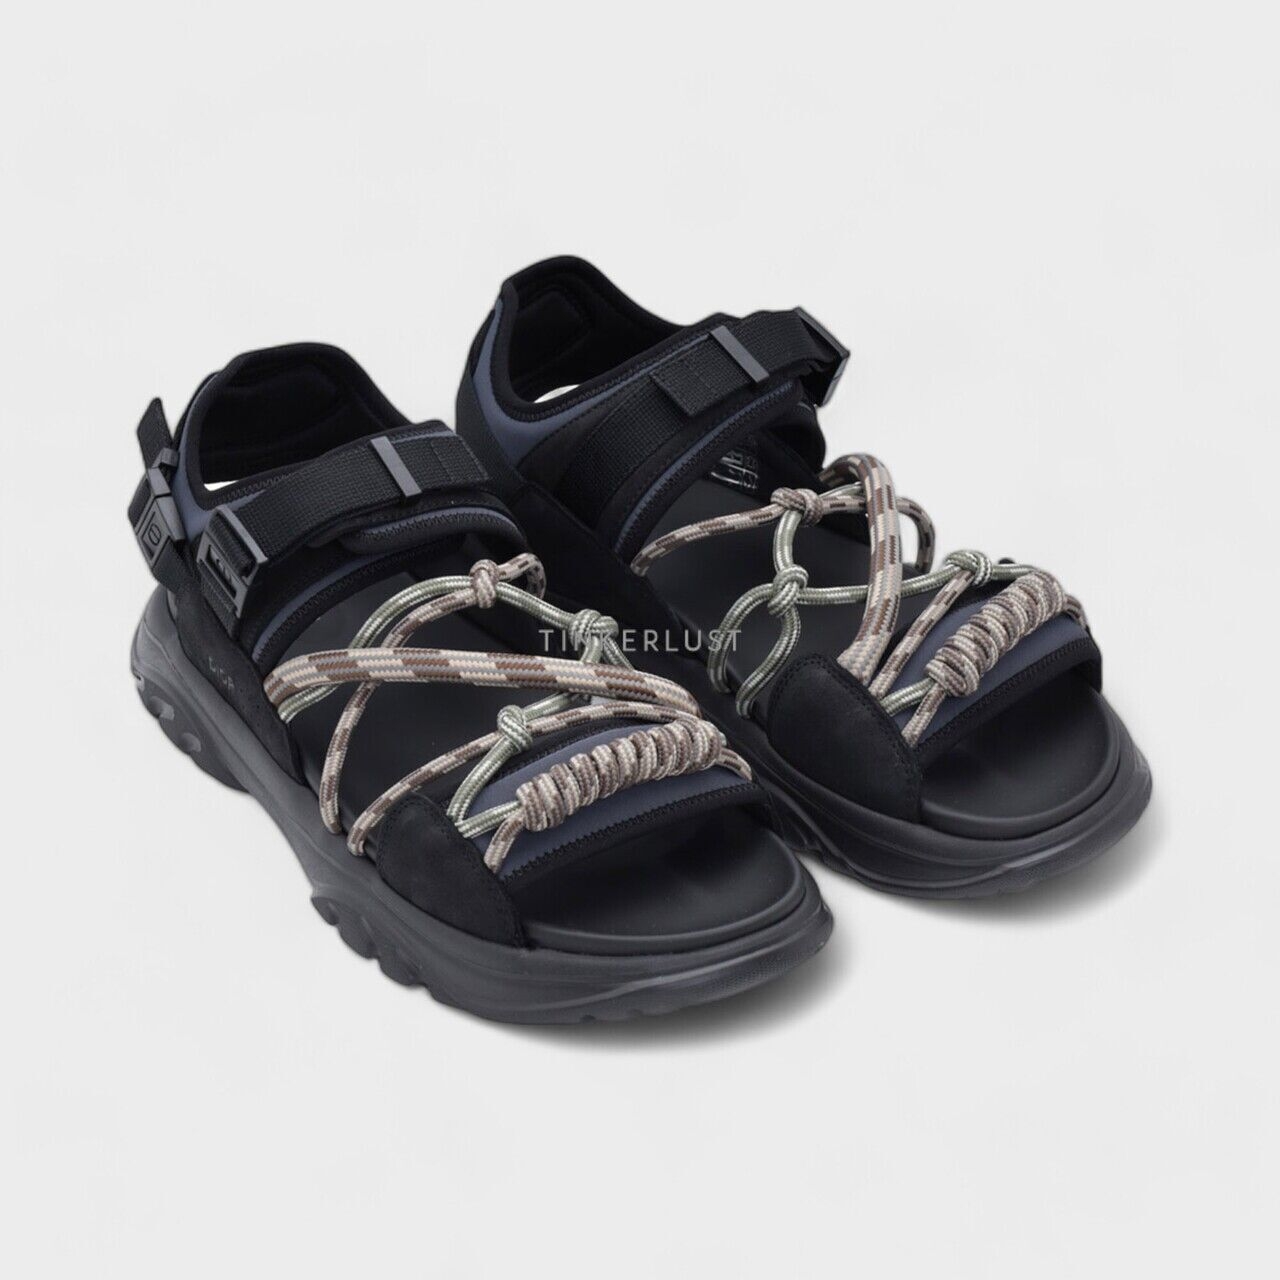 Christian Dior H-Town Sandals in Black/Gray Technical Fabric with Brown Nubuck Calfskin